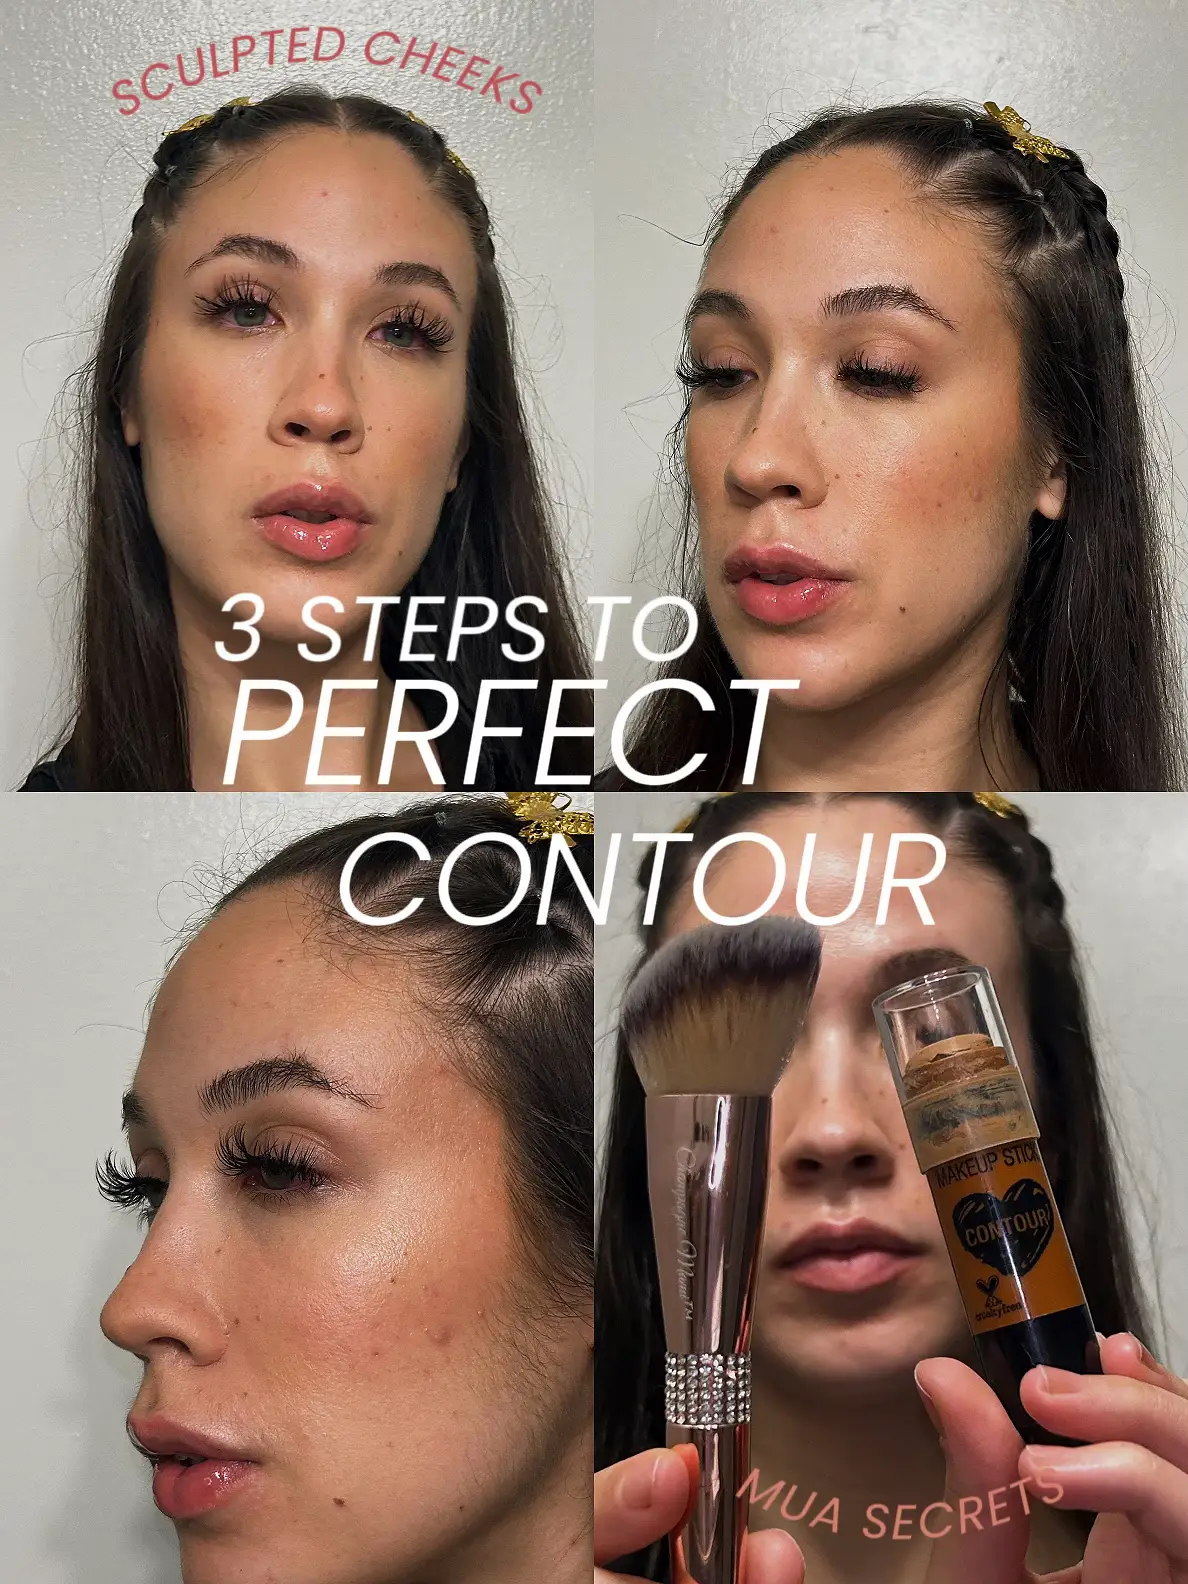 Makeup to Recreate, 3 Steps to Celebrity Contour, Gallery posted by  NICOLE BIRD